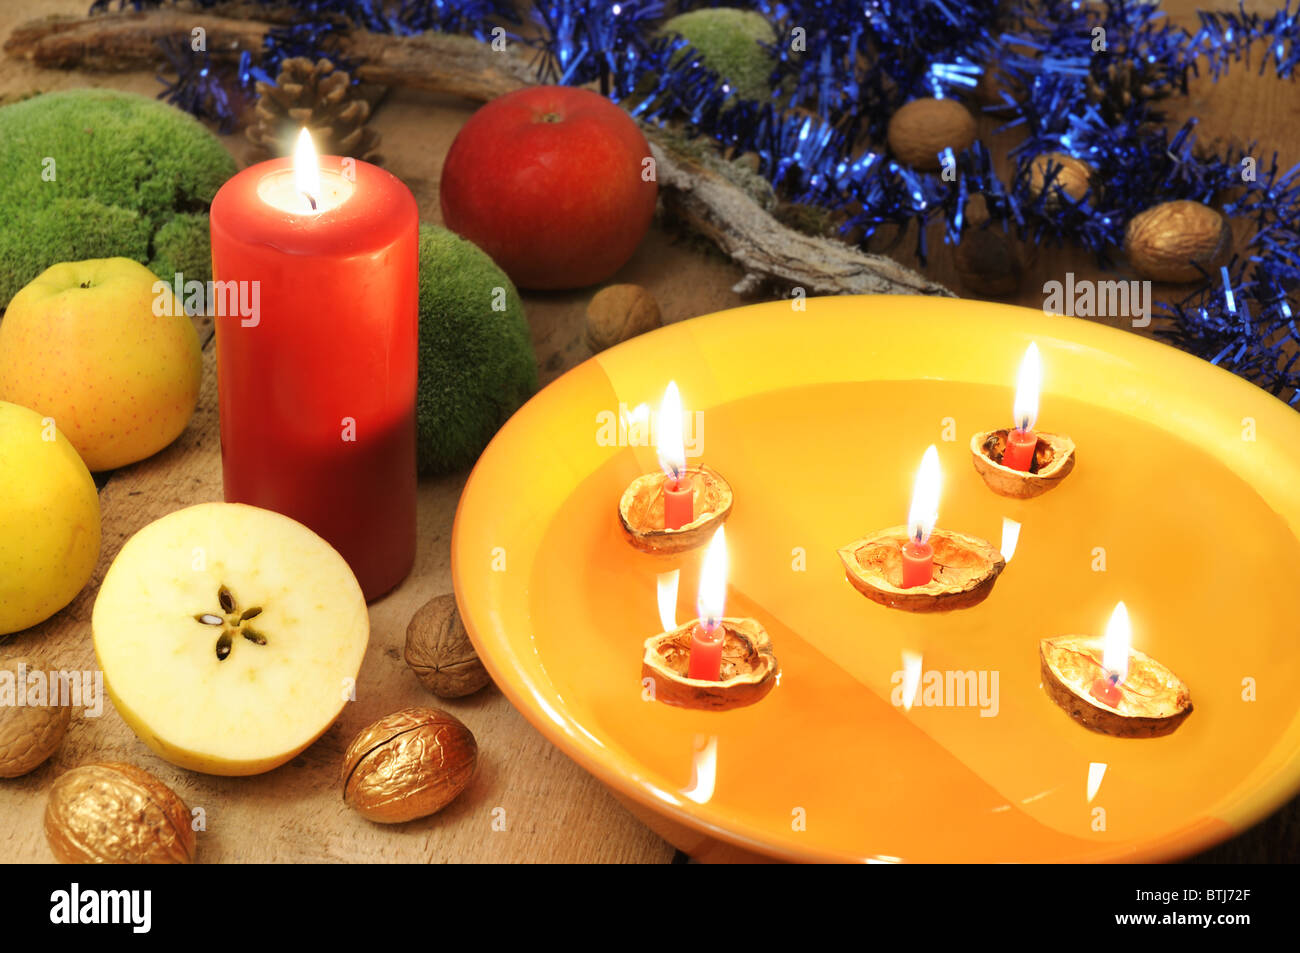 Christmas customs - walnut shell boats and half cut apple in Christmas decoration. Stock Photo